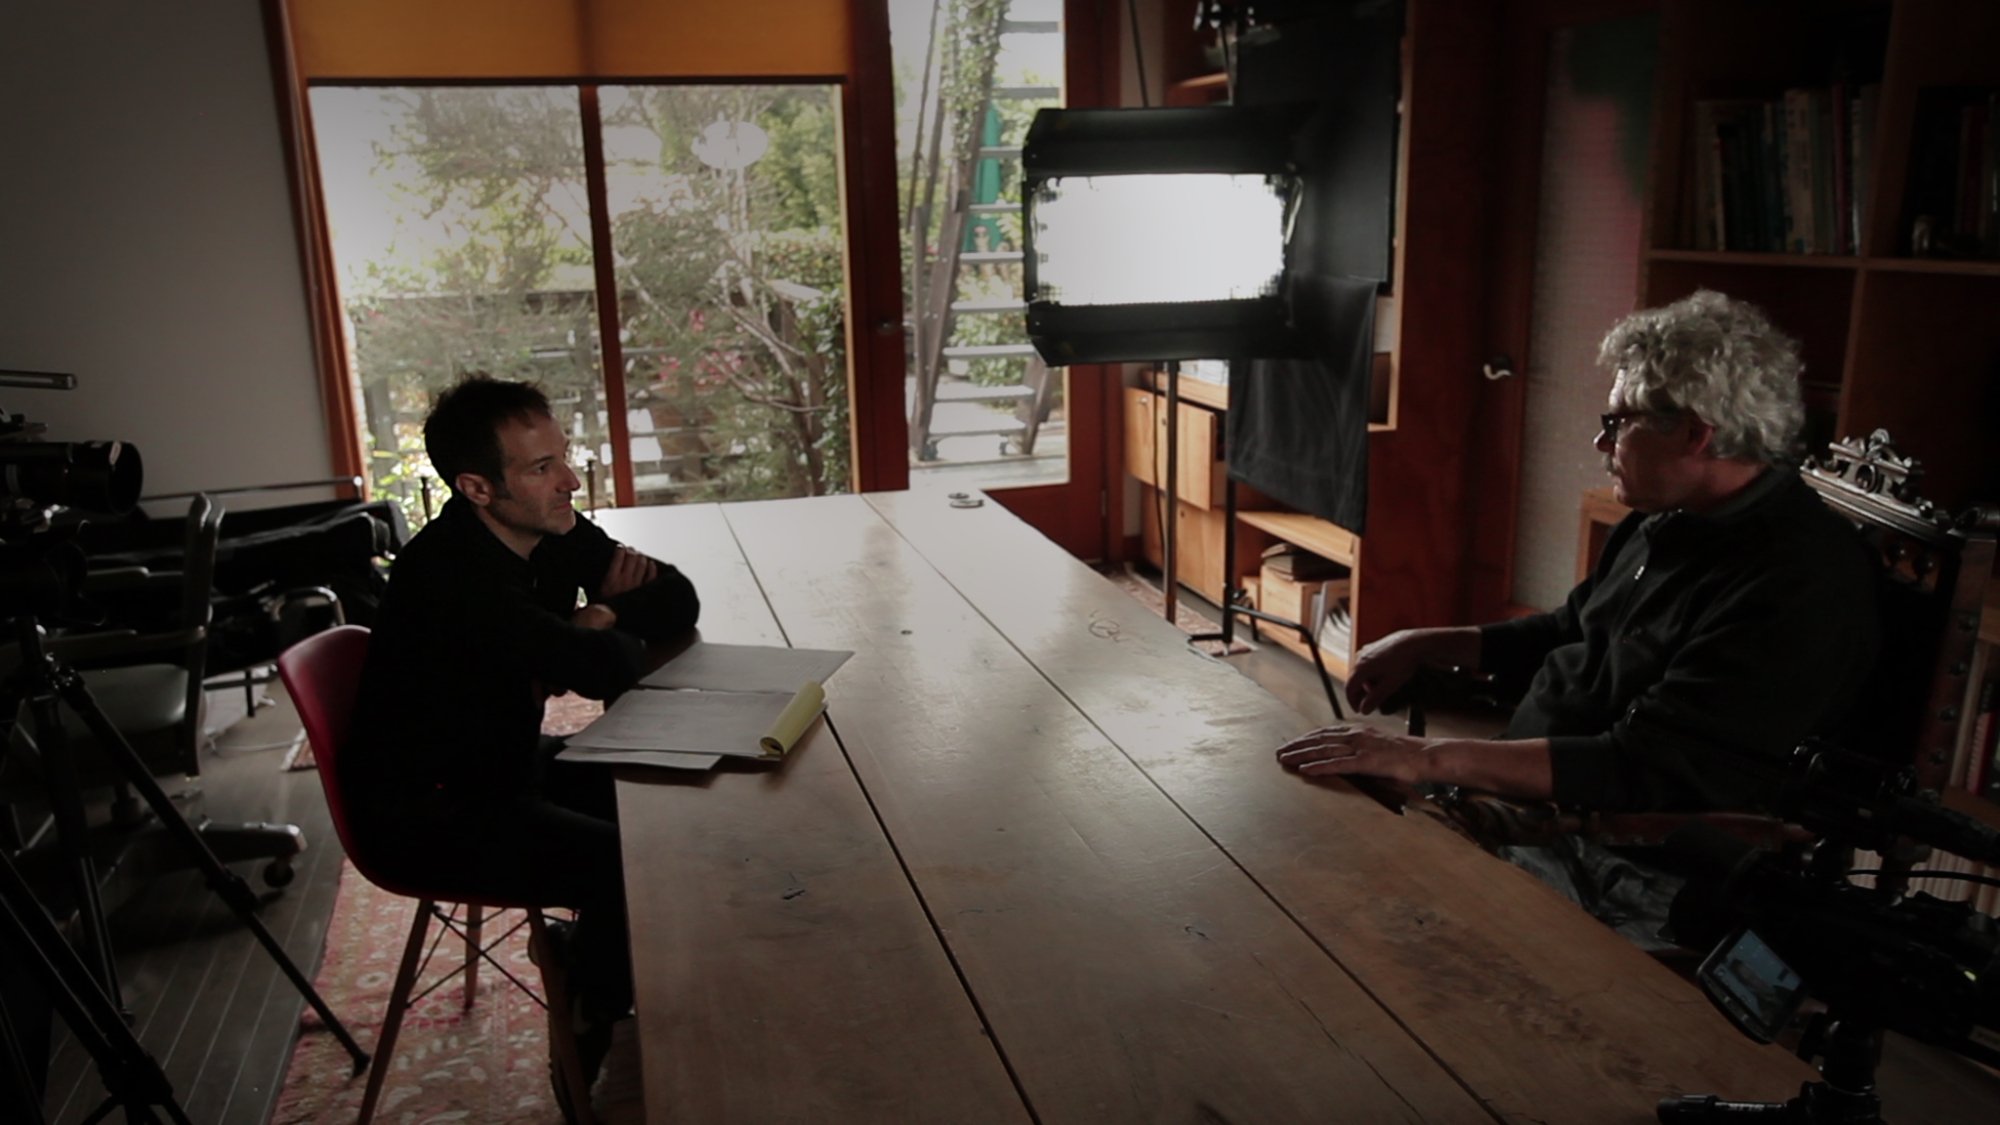 A still from the documentary "Icarus" showing two people sitting across from each other at a table doing an interview.